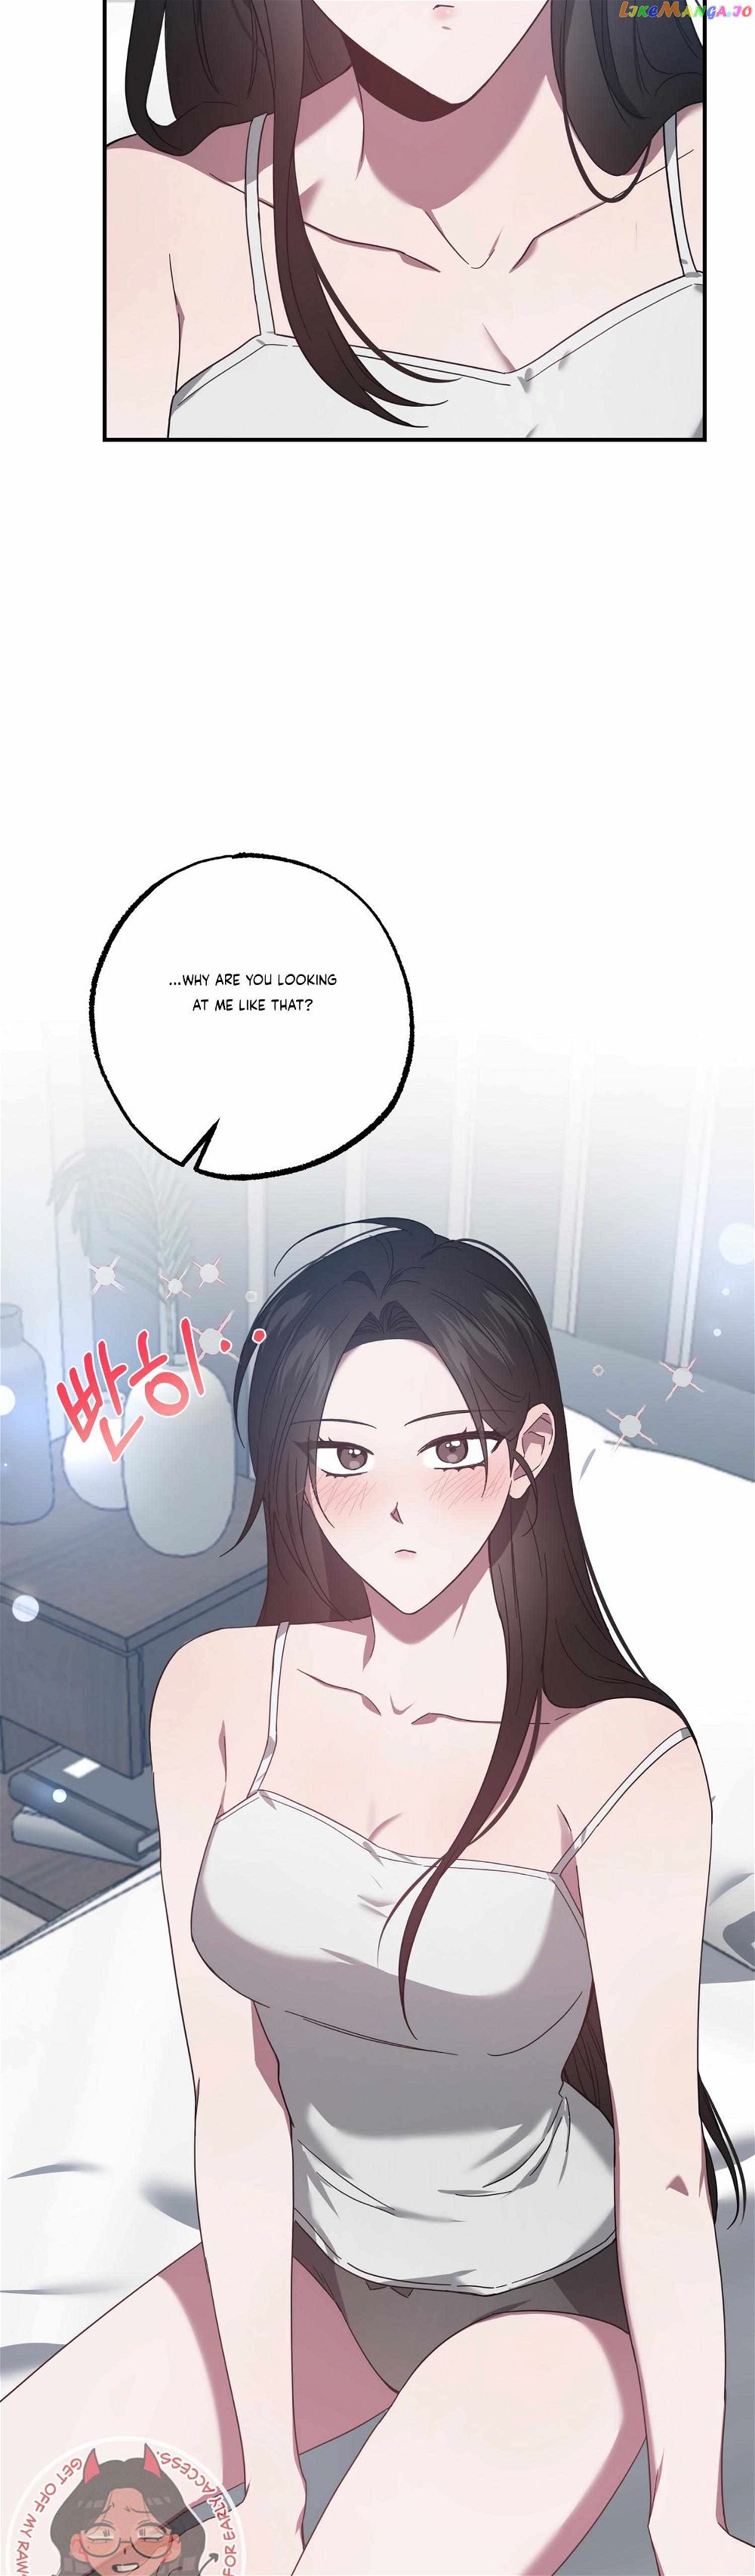 Mijeong’s Relationships chapter 36 - Page 8